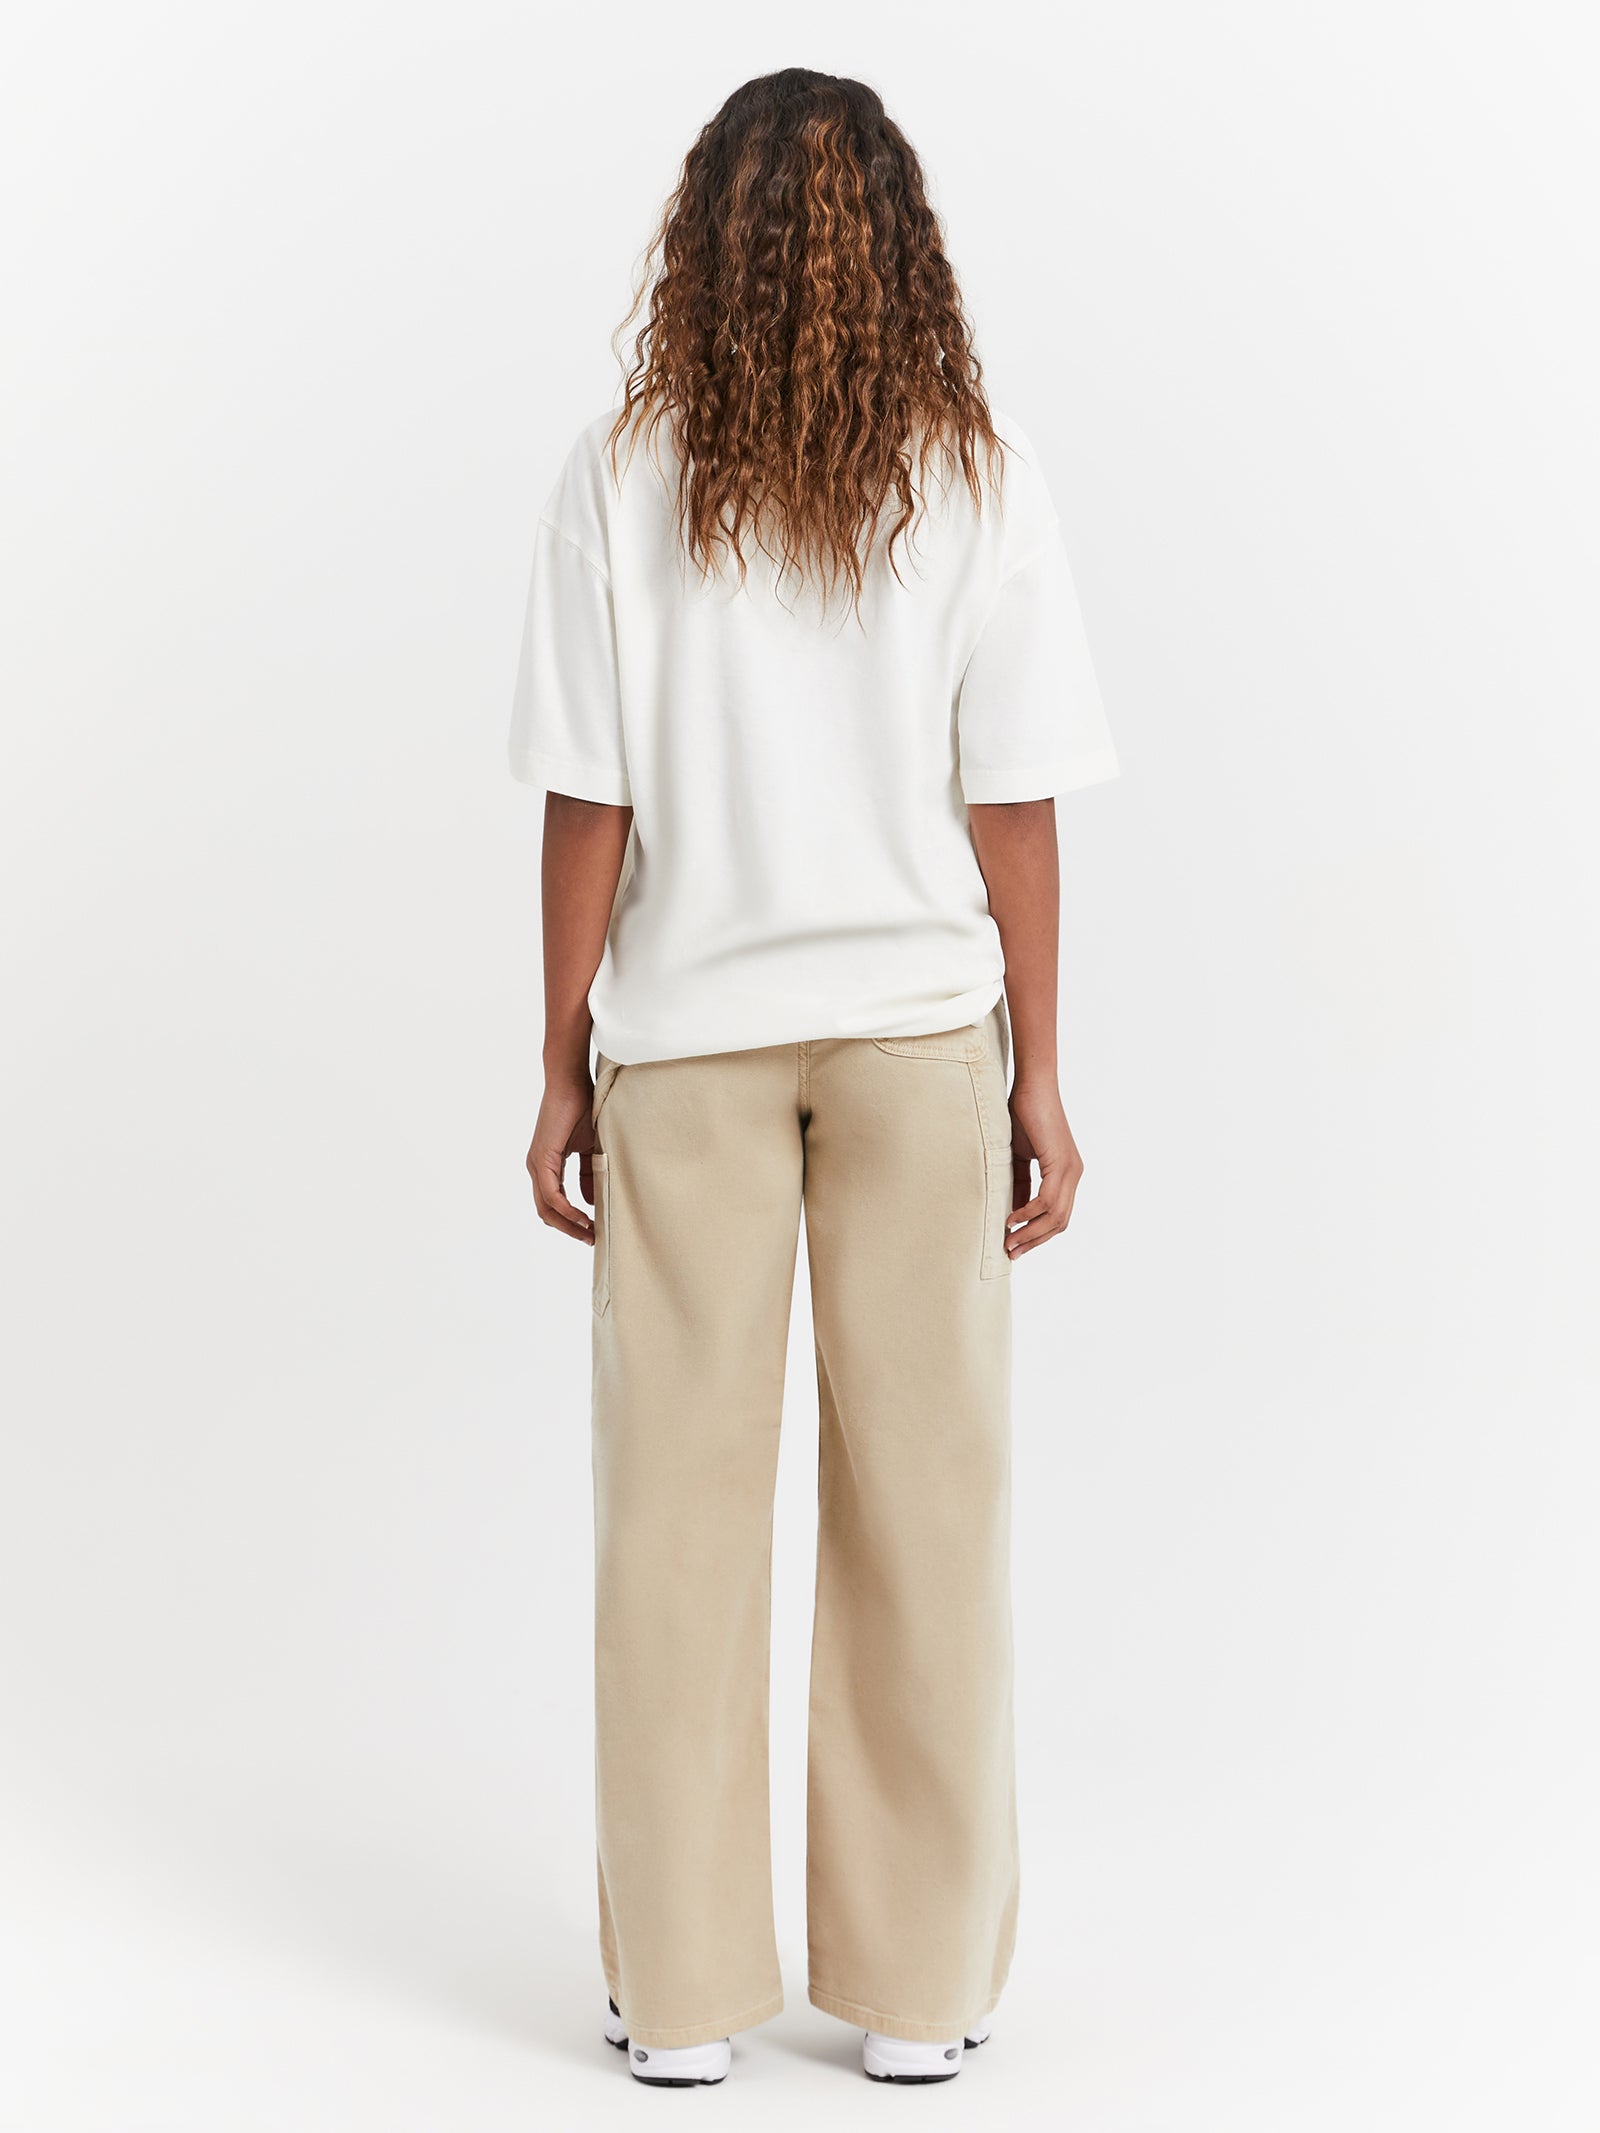 Kaylee Cream Stretch Knit Pant | Peace of Cloth